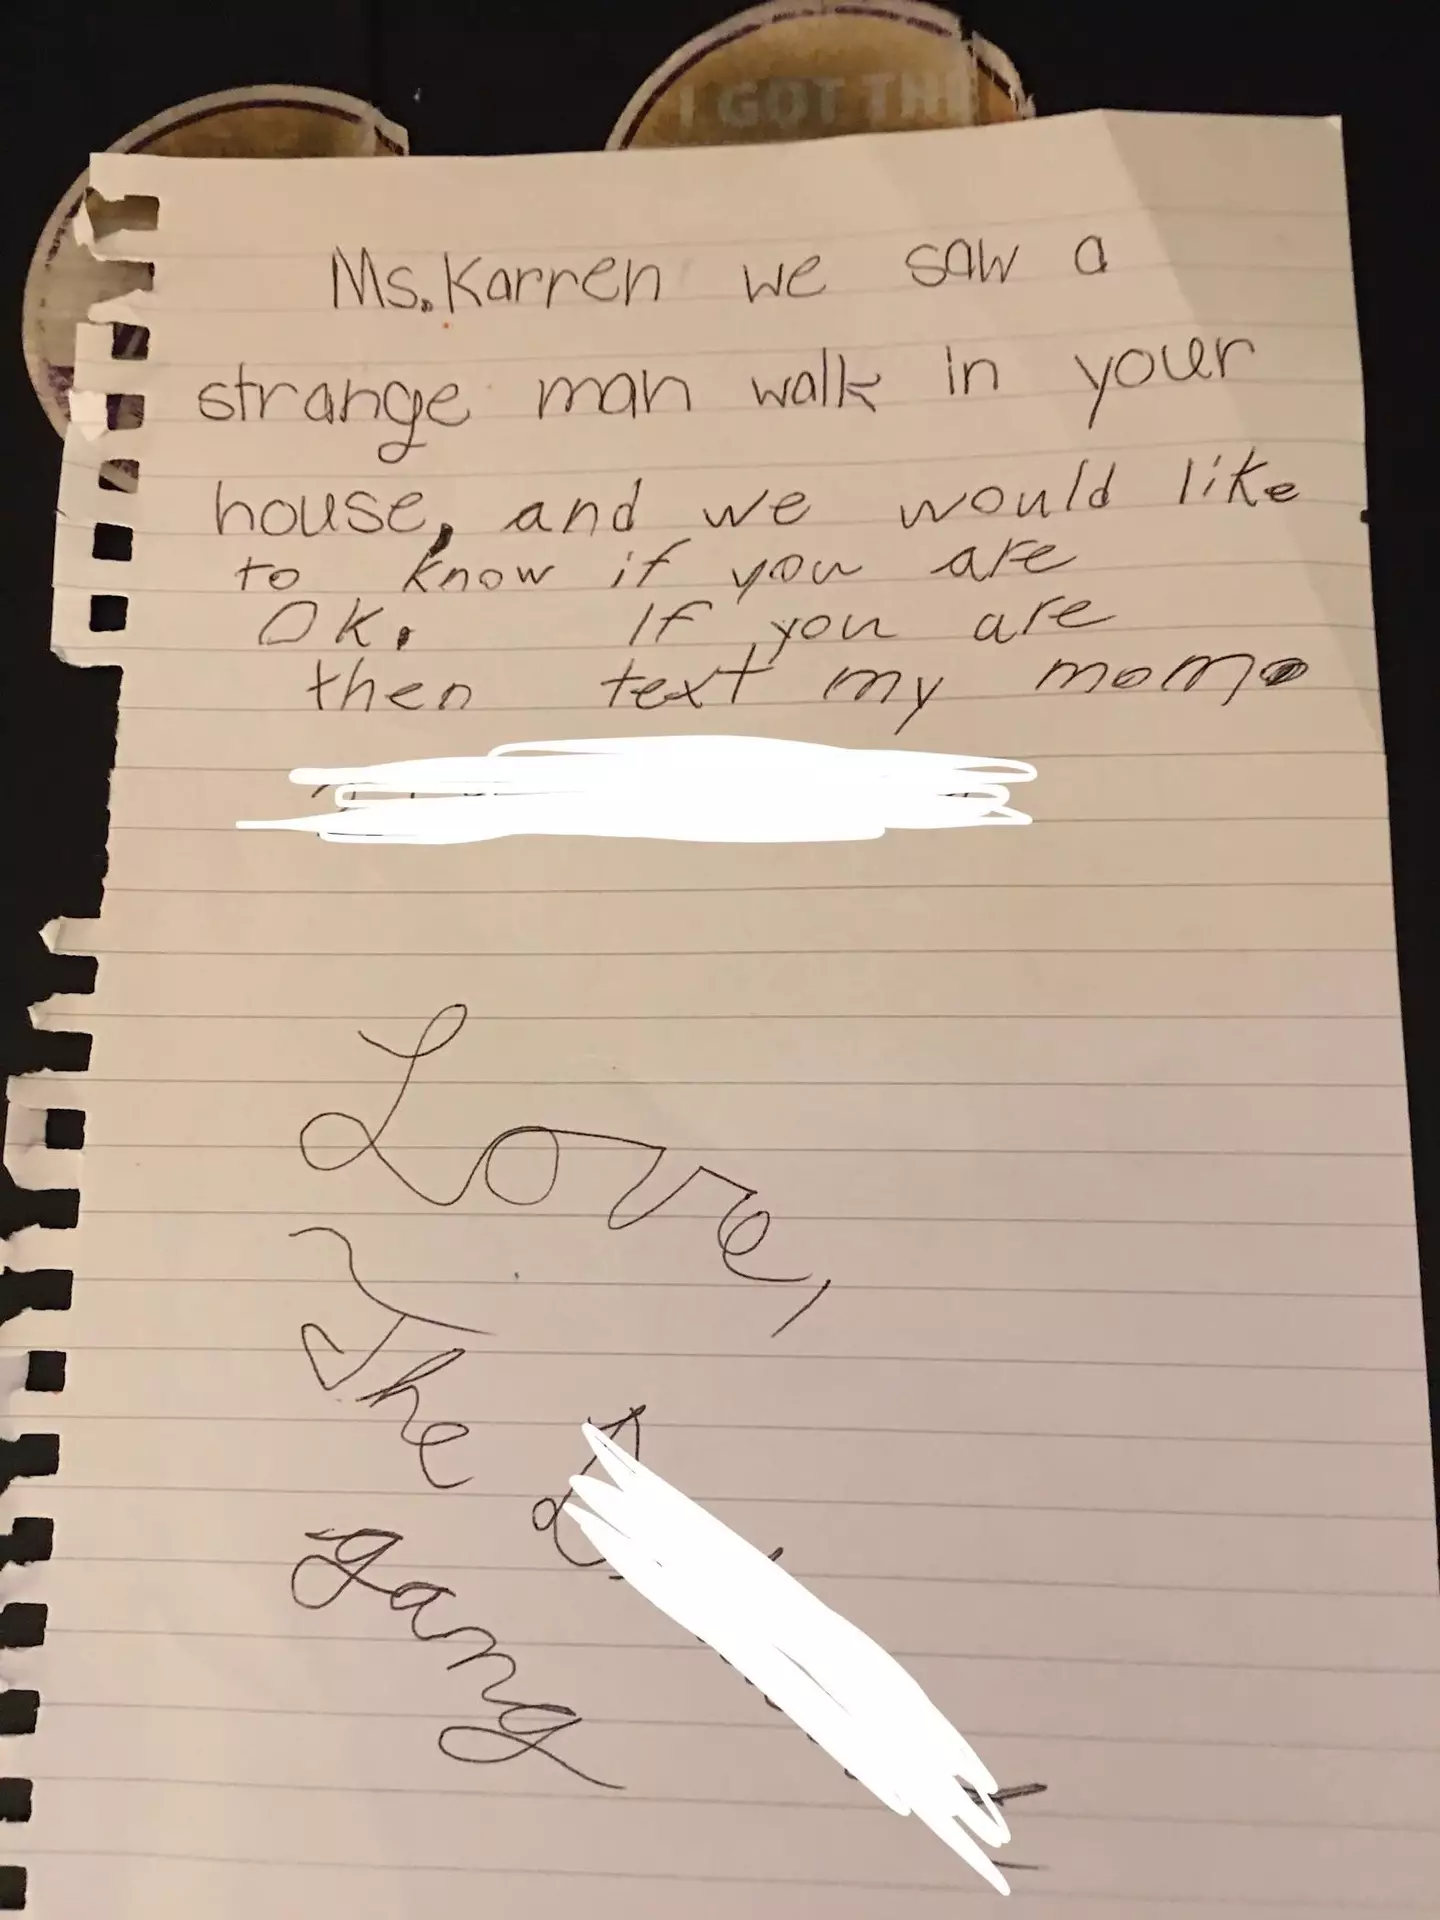 The woman's daughter posted about the amusing note on Reddit.